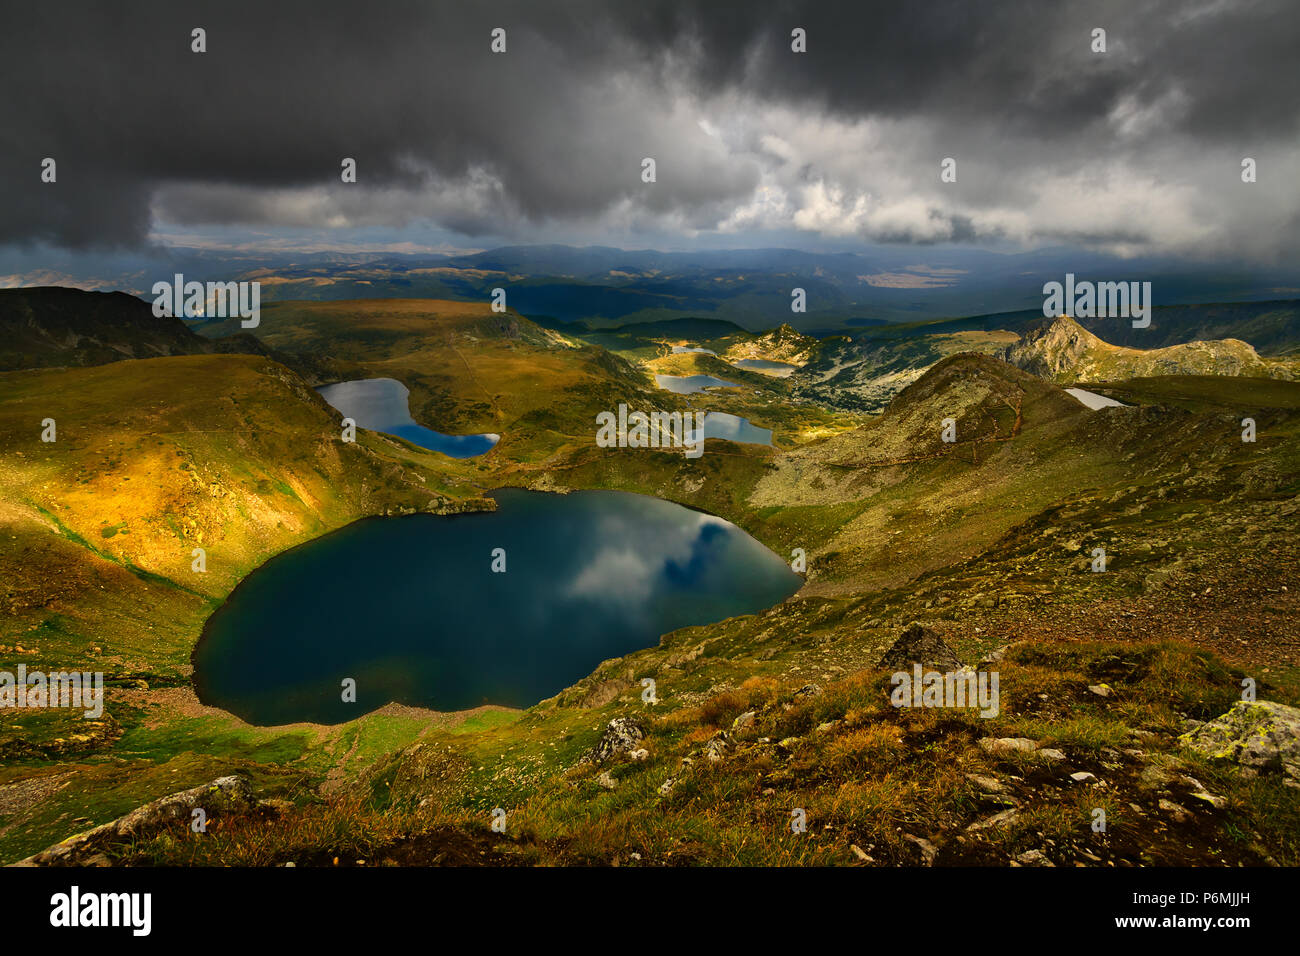 The Seven Rila Lakes are a group of glacial lakes, situated in the northwestern Rila Mountains in Bulgaria. The picturesque landscape in the mountains. Stock Photo